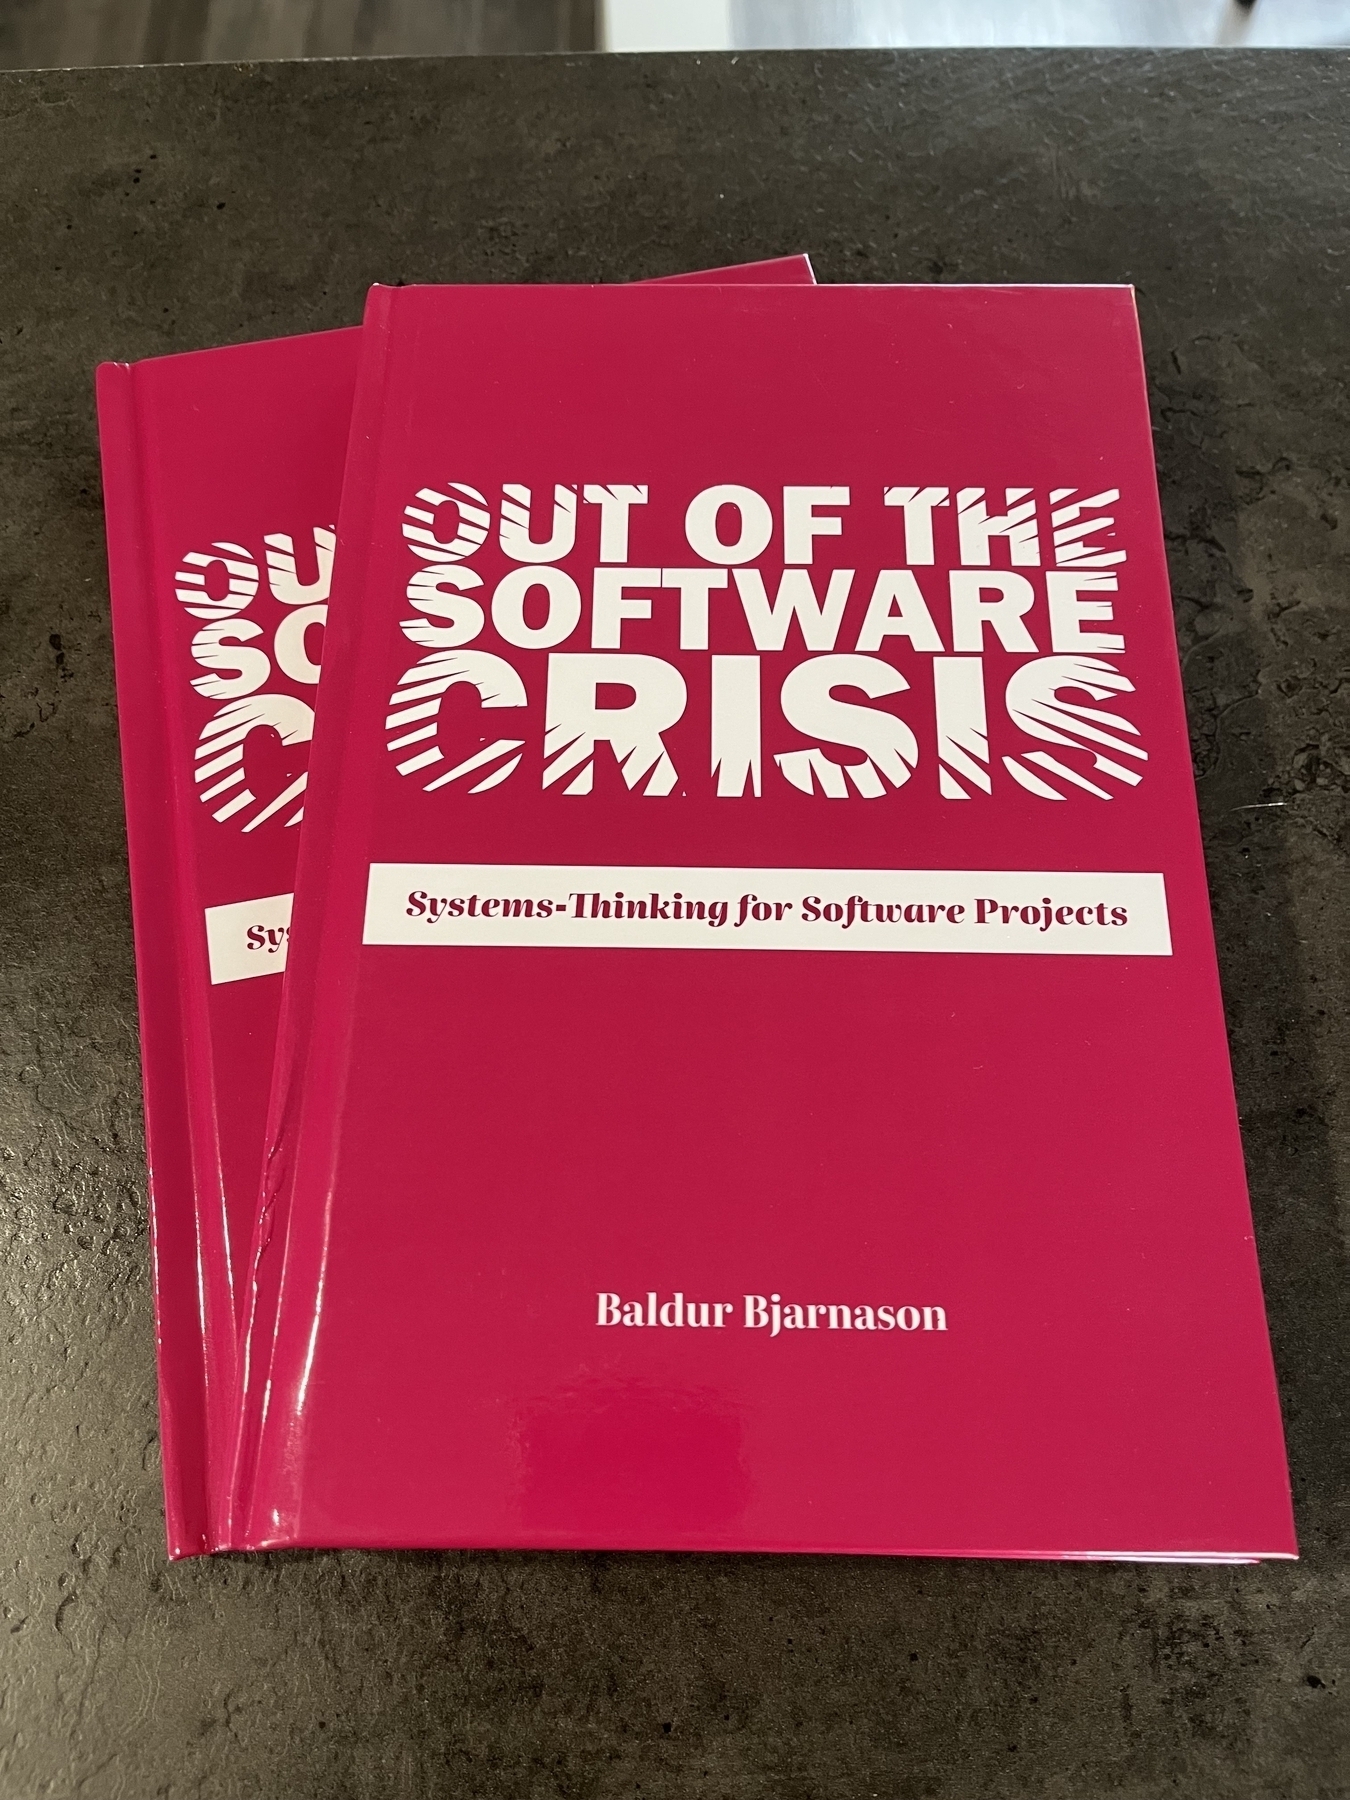 Two hardcover copies of 'Out of the Software Crisis' on a kitchen counter